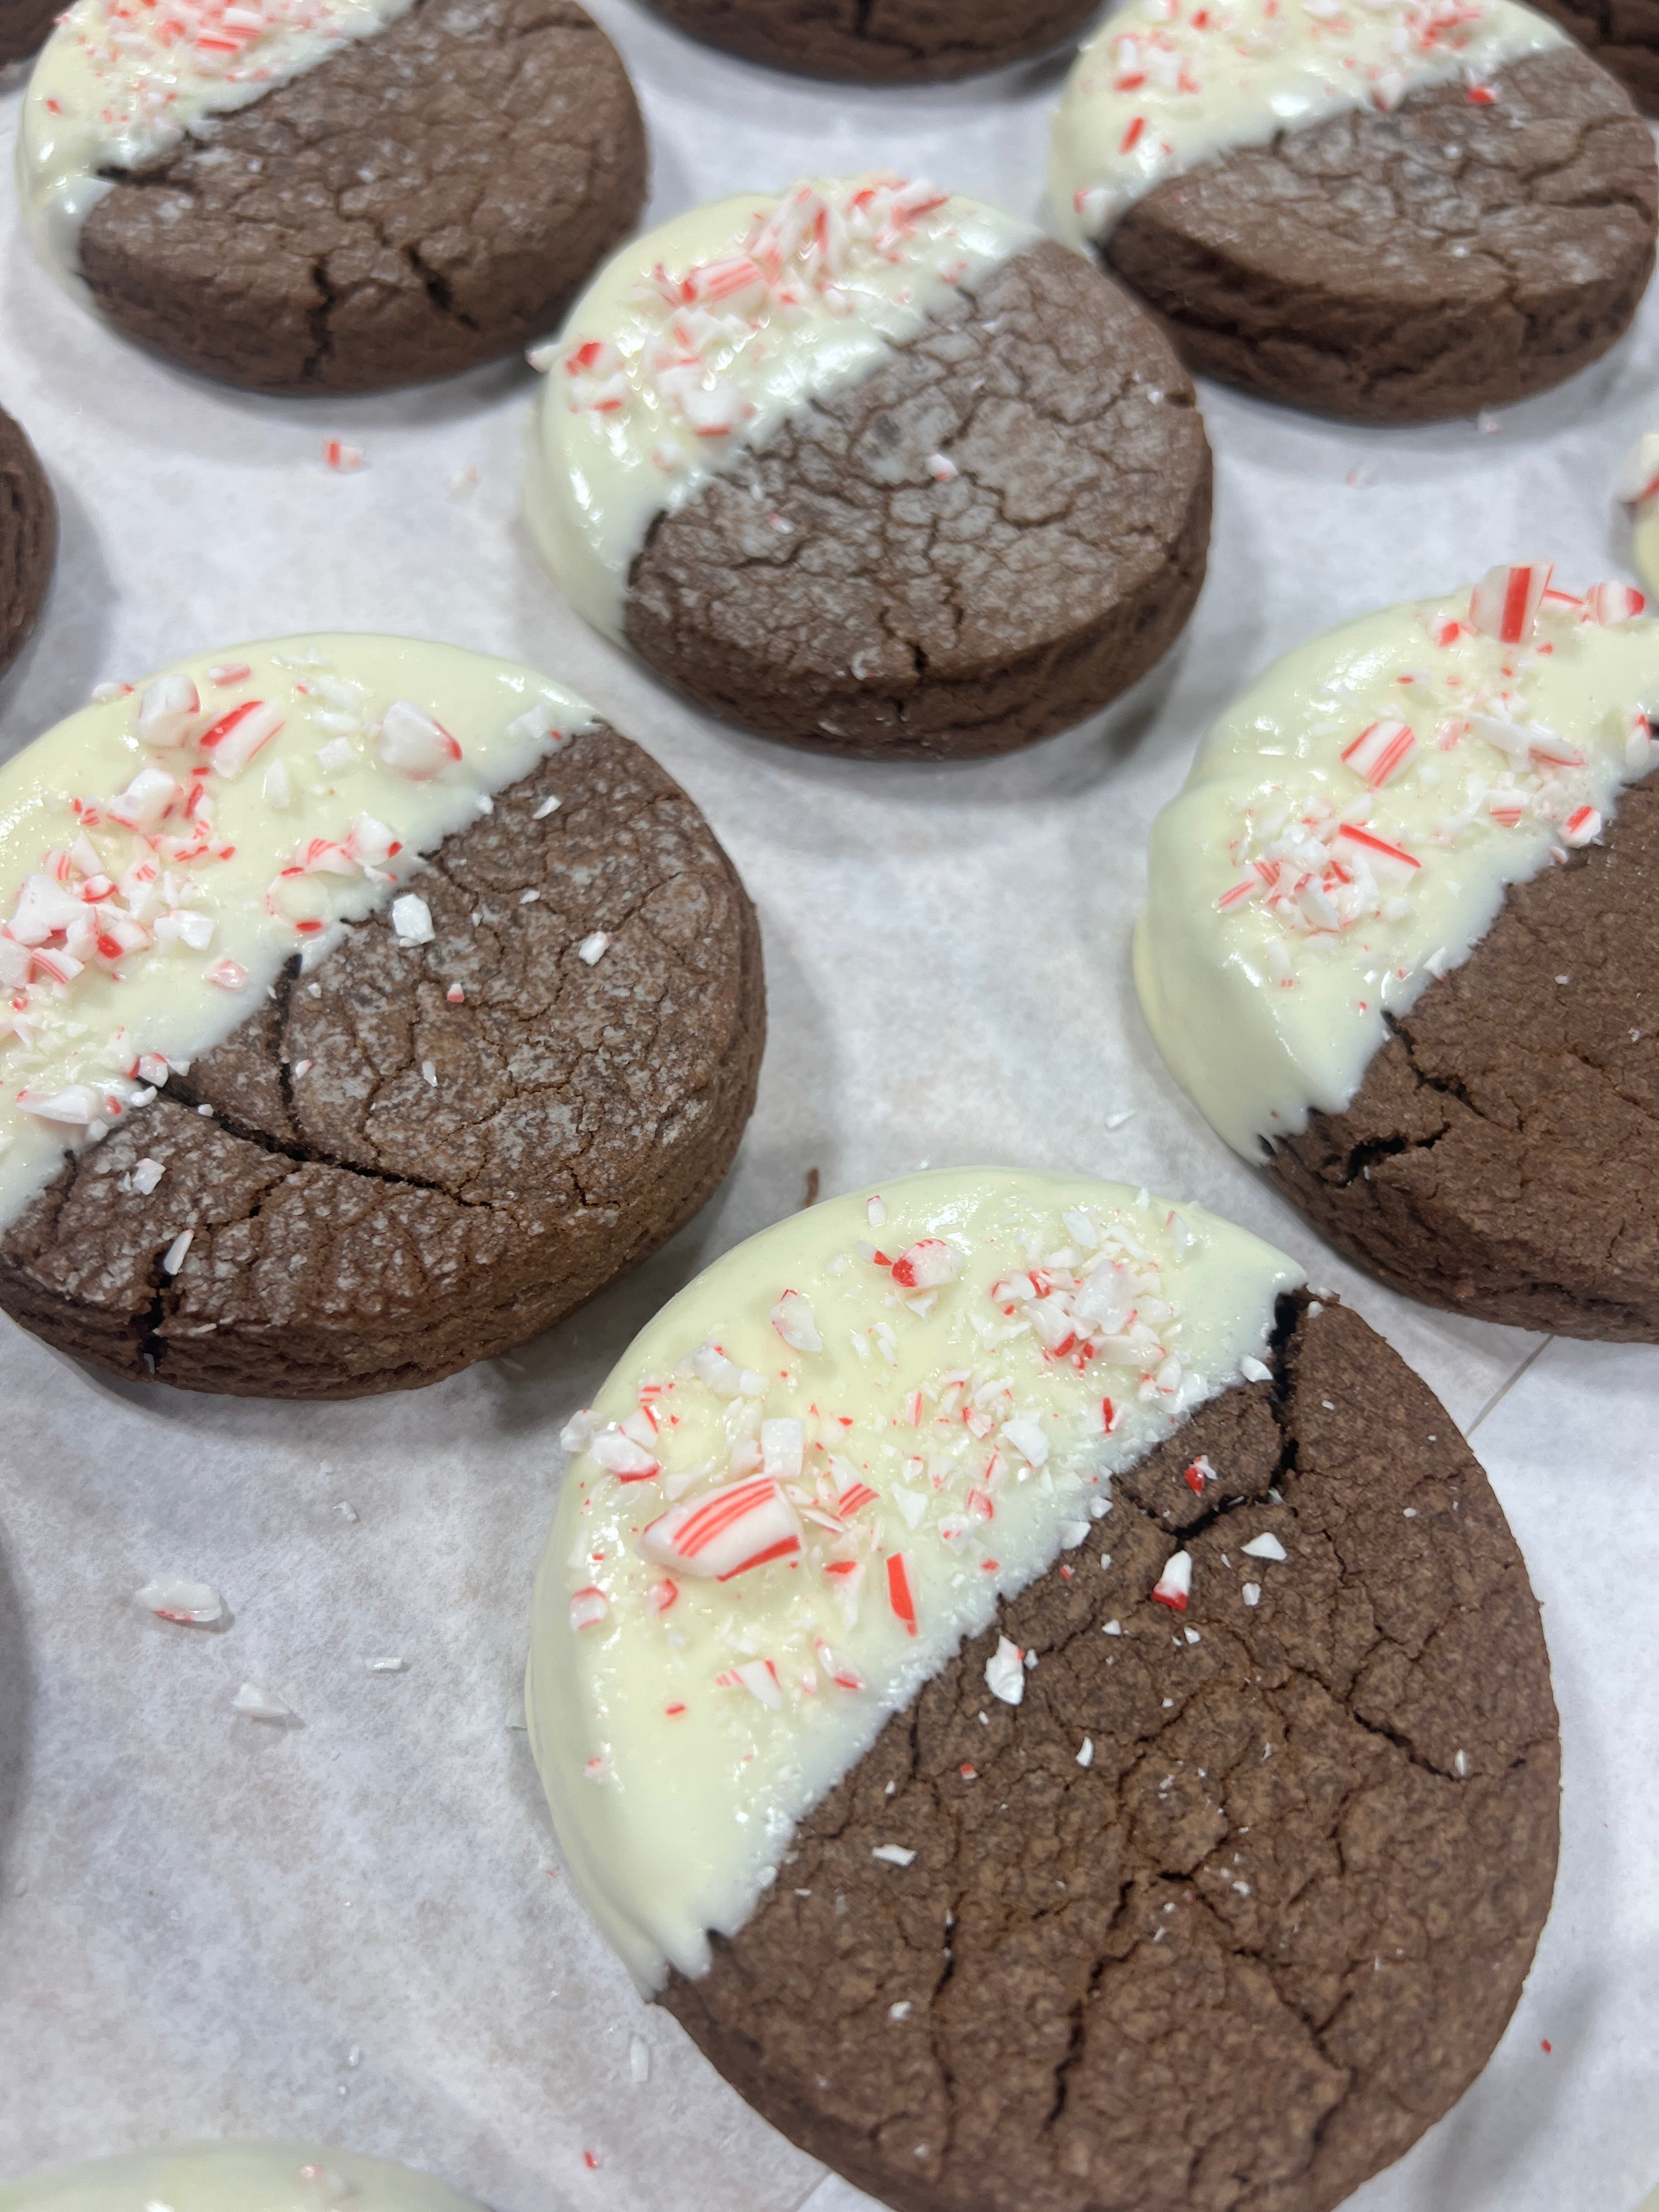 December FOTM Cookies (Peppermint Bark) - One time purchase